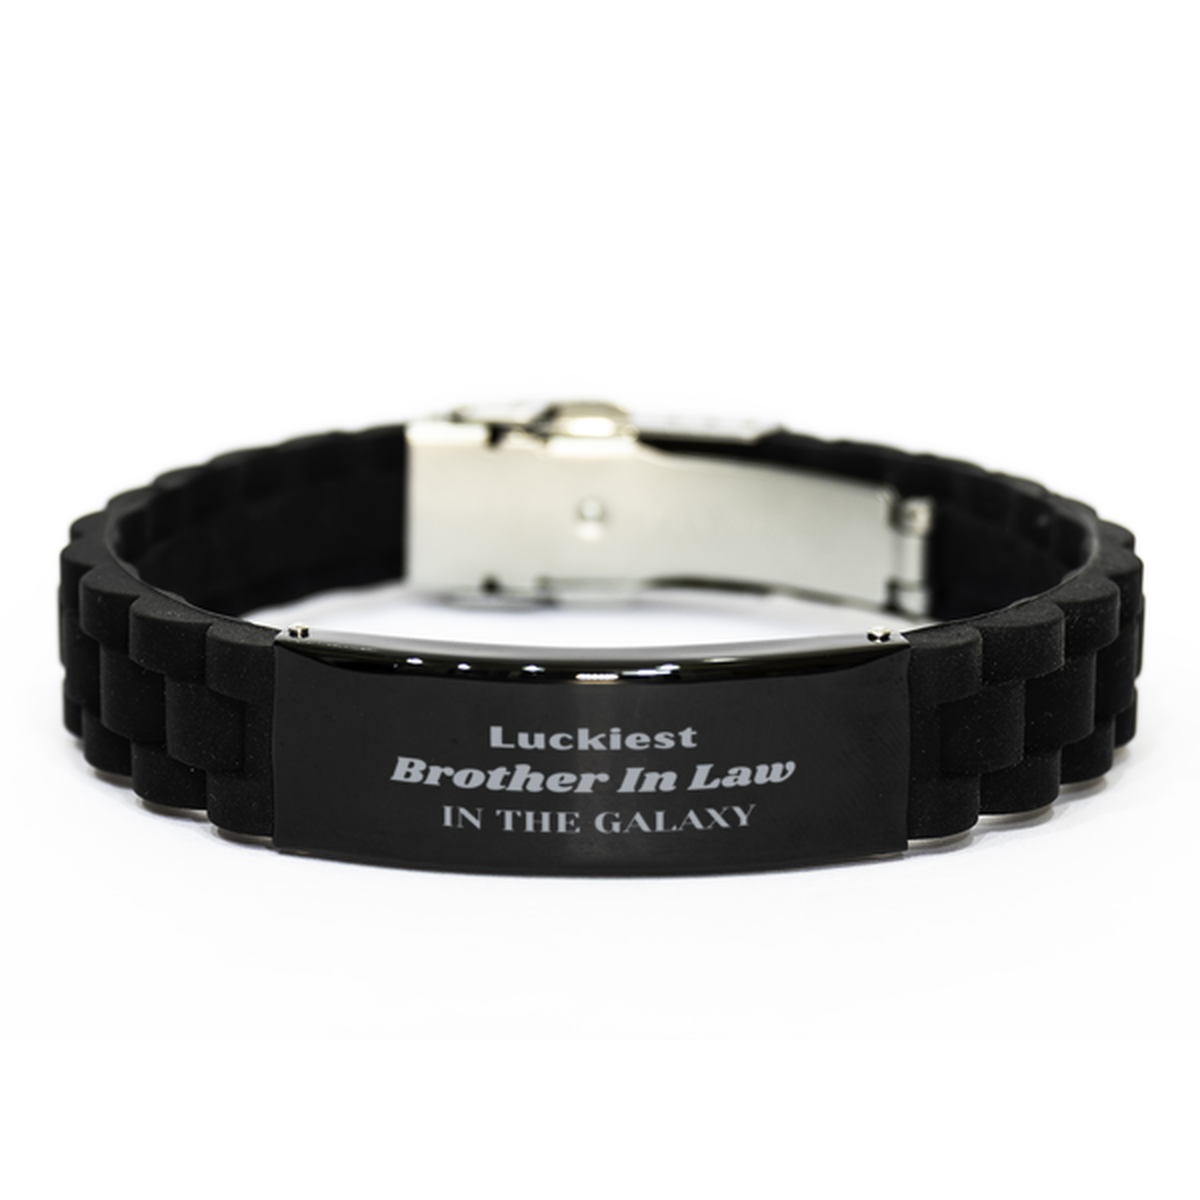 Luckiest Brother In Law in the Galaxy, To My Brother In Law Engraved Gifts, Christmas Brother In Law Black Glidelock Clasp Bracelet Gifts, X-mas Birthday Unique Gifts For Brother In Law Men Women